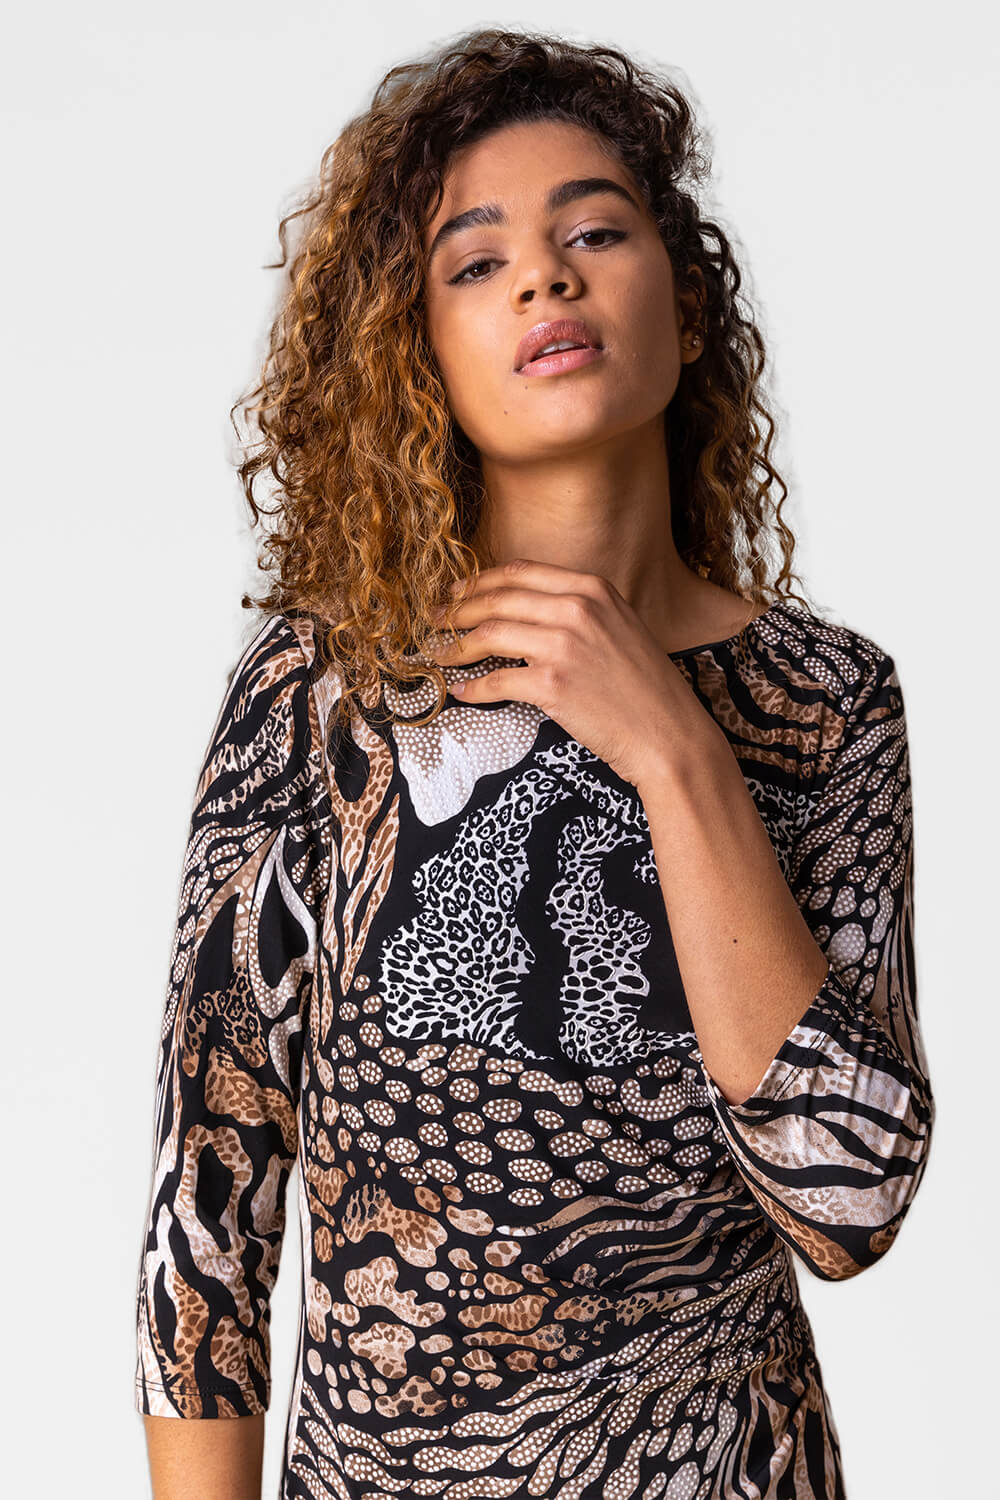 ABSTRACT ANIMAL PRINT LACE TOP in Brown Multi